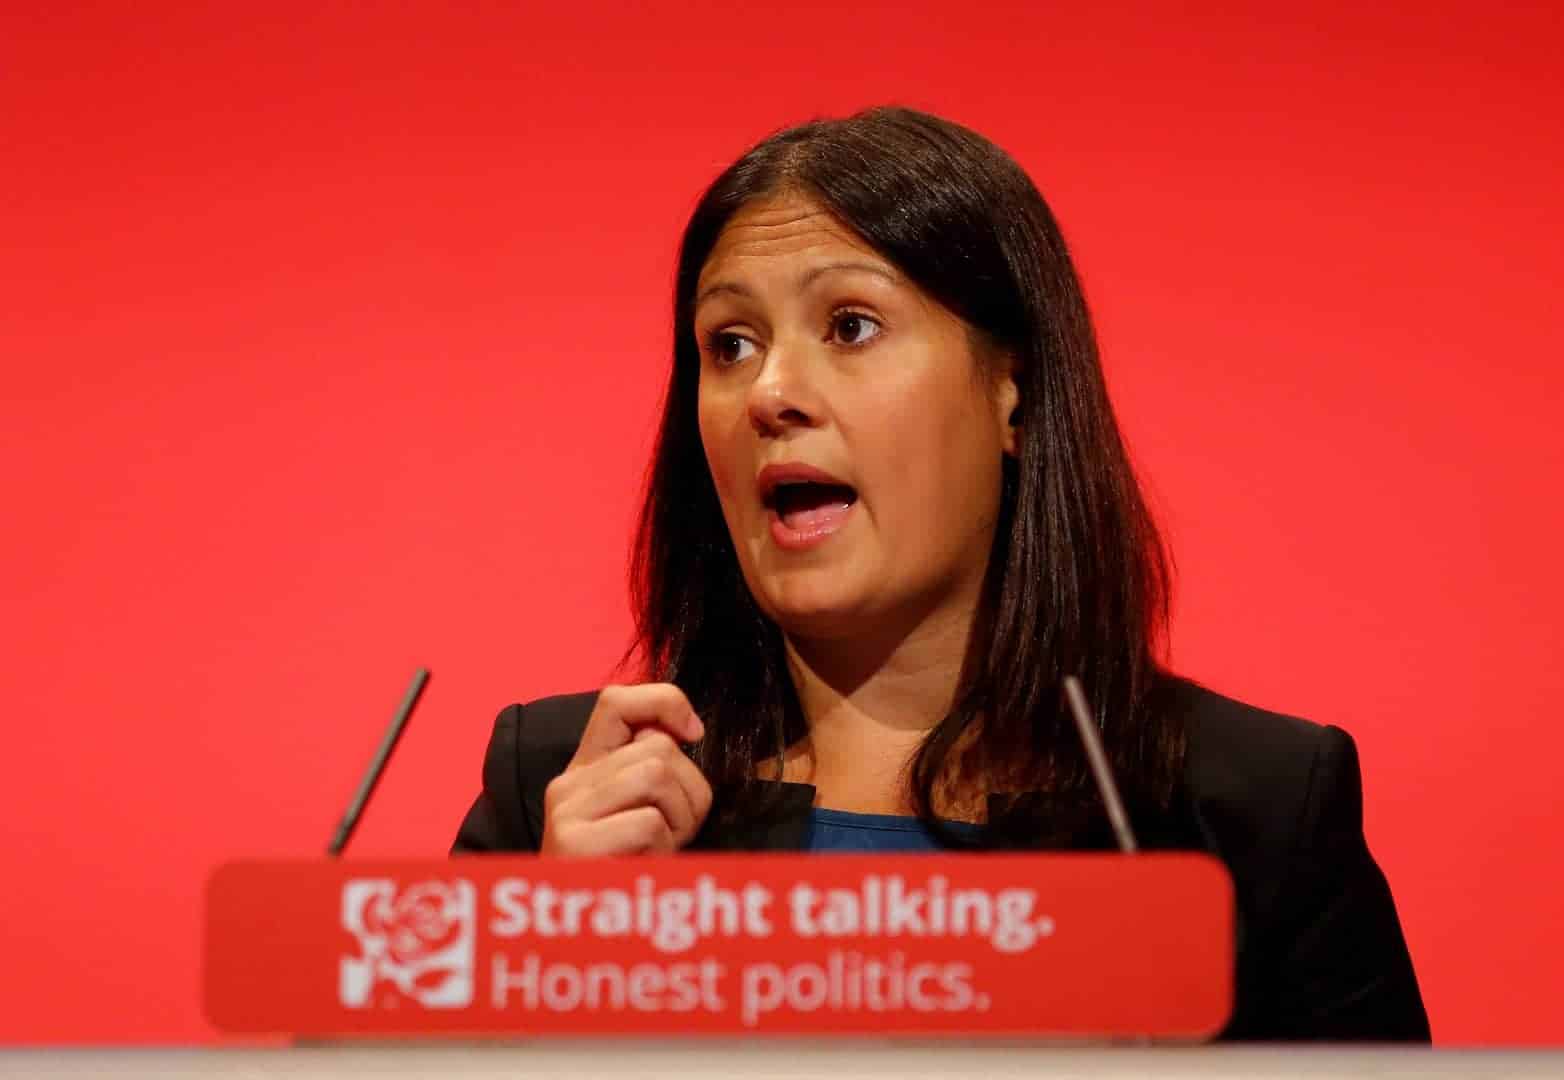 A Tory MP tried to challenge Lisa Nandy on levelling up and it did not go well